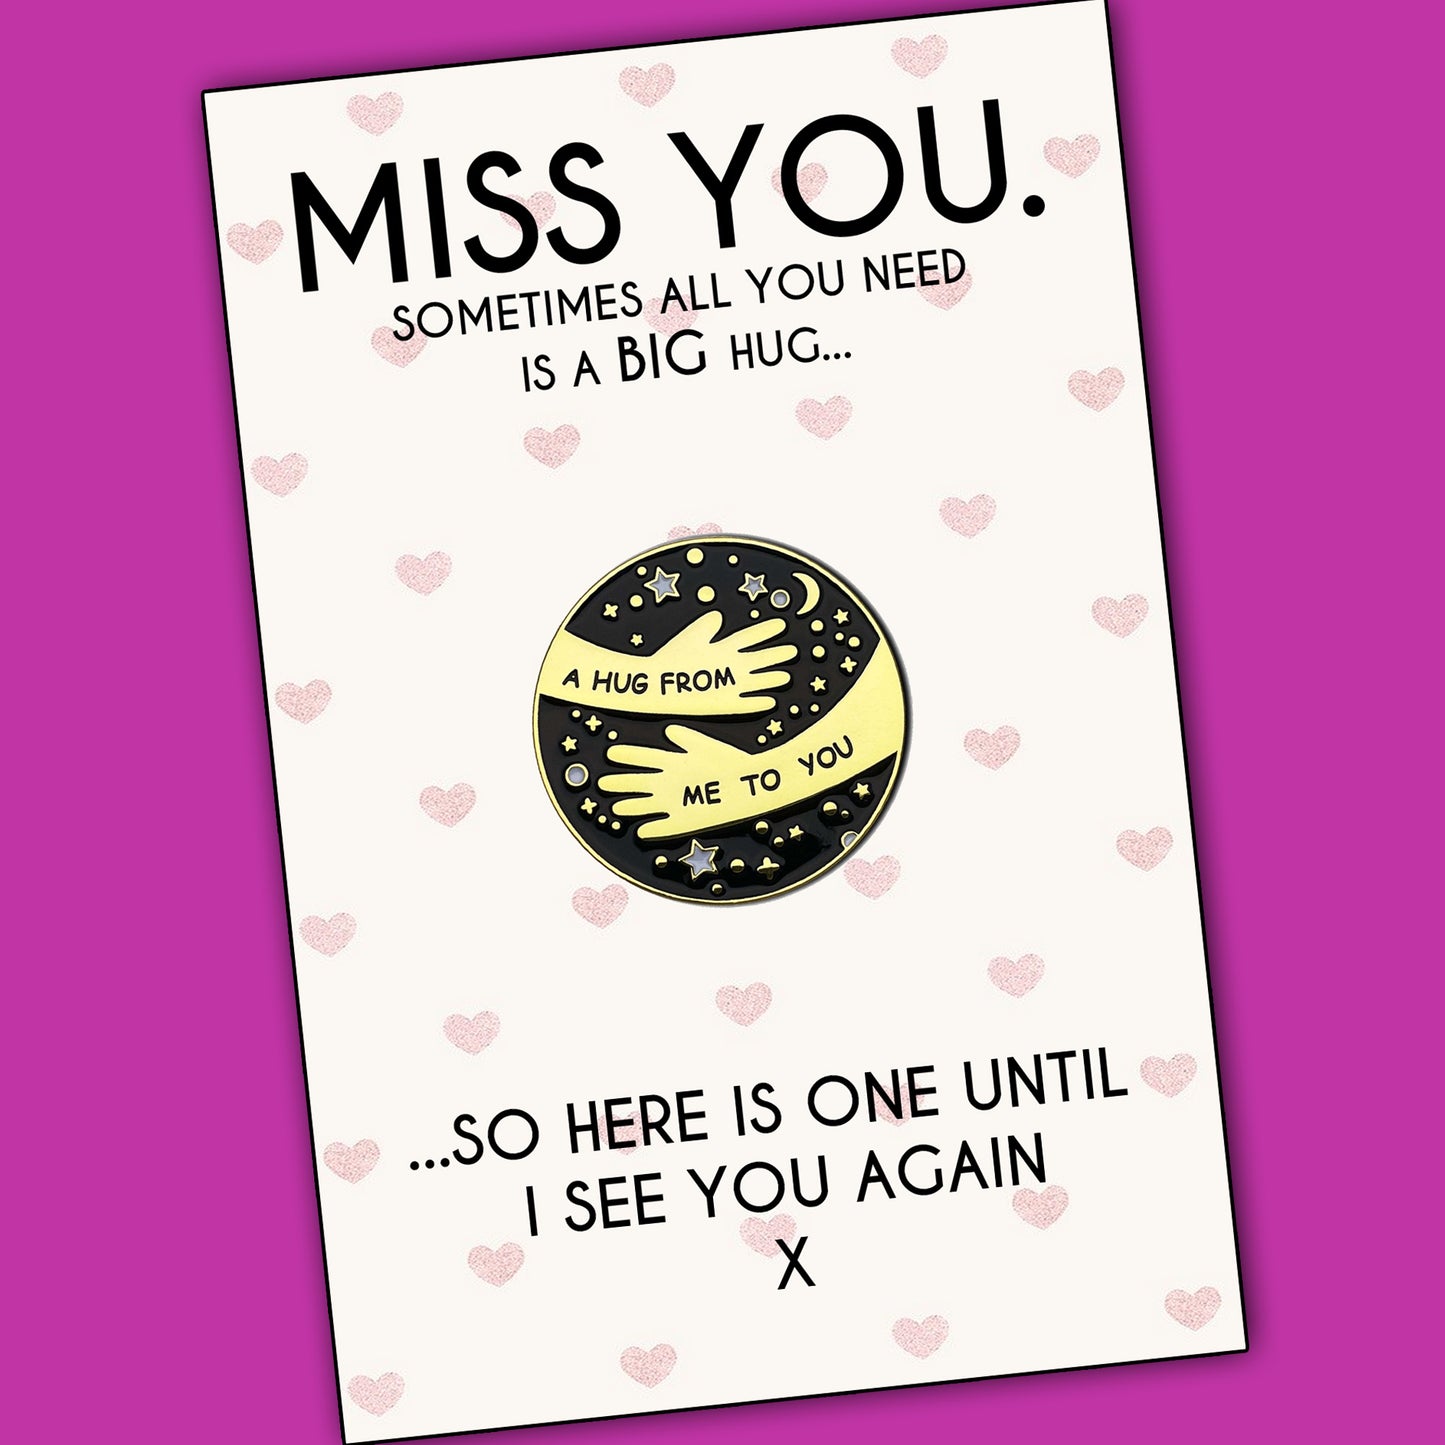 Miss You Pocket Hug Pin Badges & Personalised Message Cards